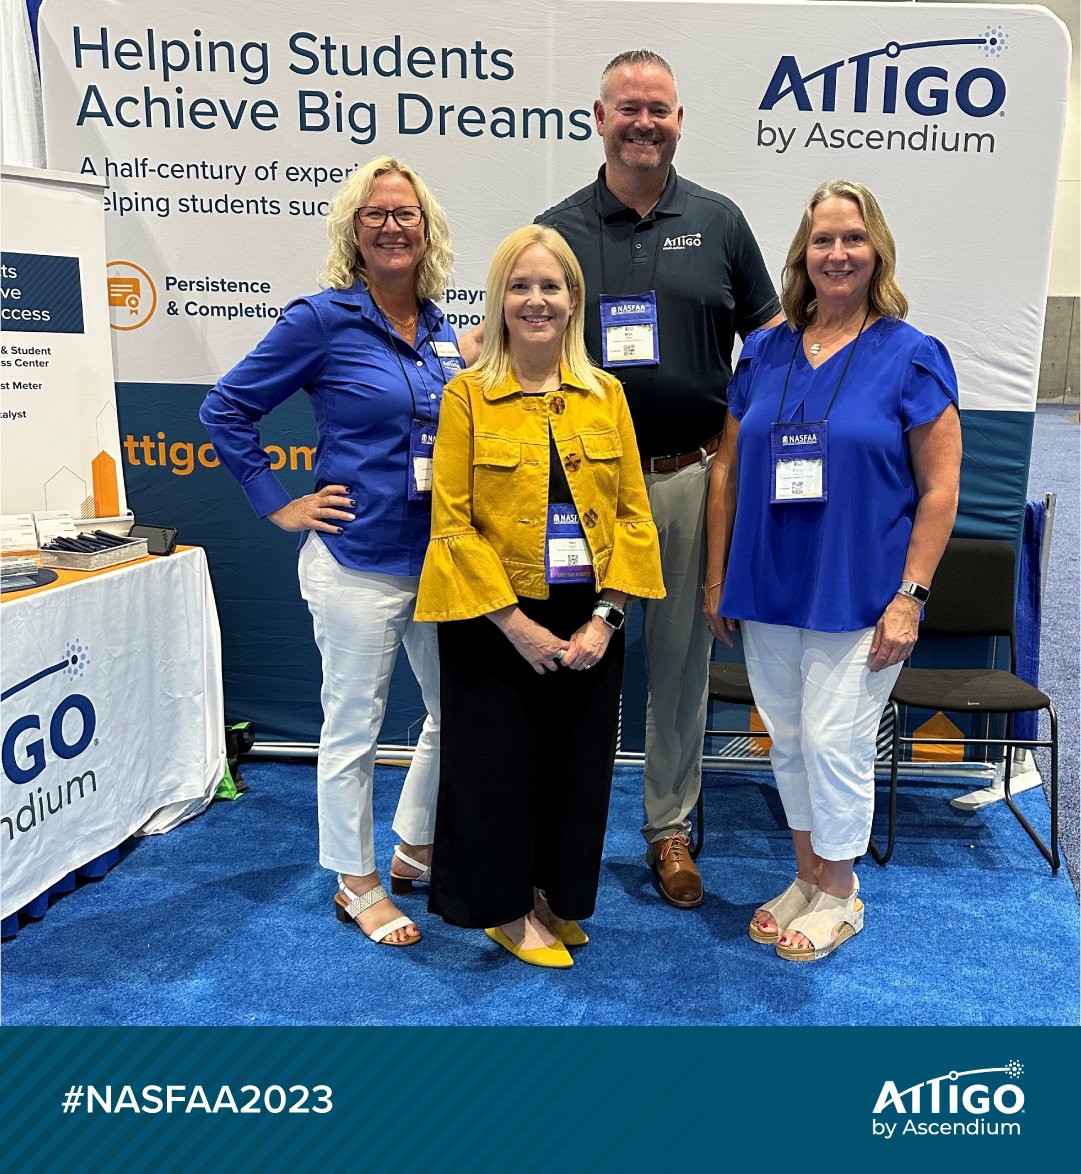 If you’re at #NASFAA2023, stop by the #Attigo booth! We'd love to share information about our solutions and how they can help your students more easily navigate student loan repayment.
#HigherEd #StudentLoans @NASFAA